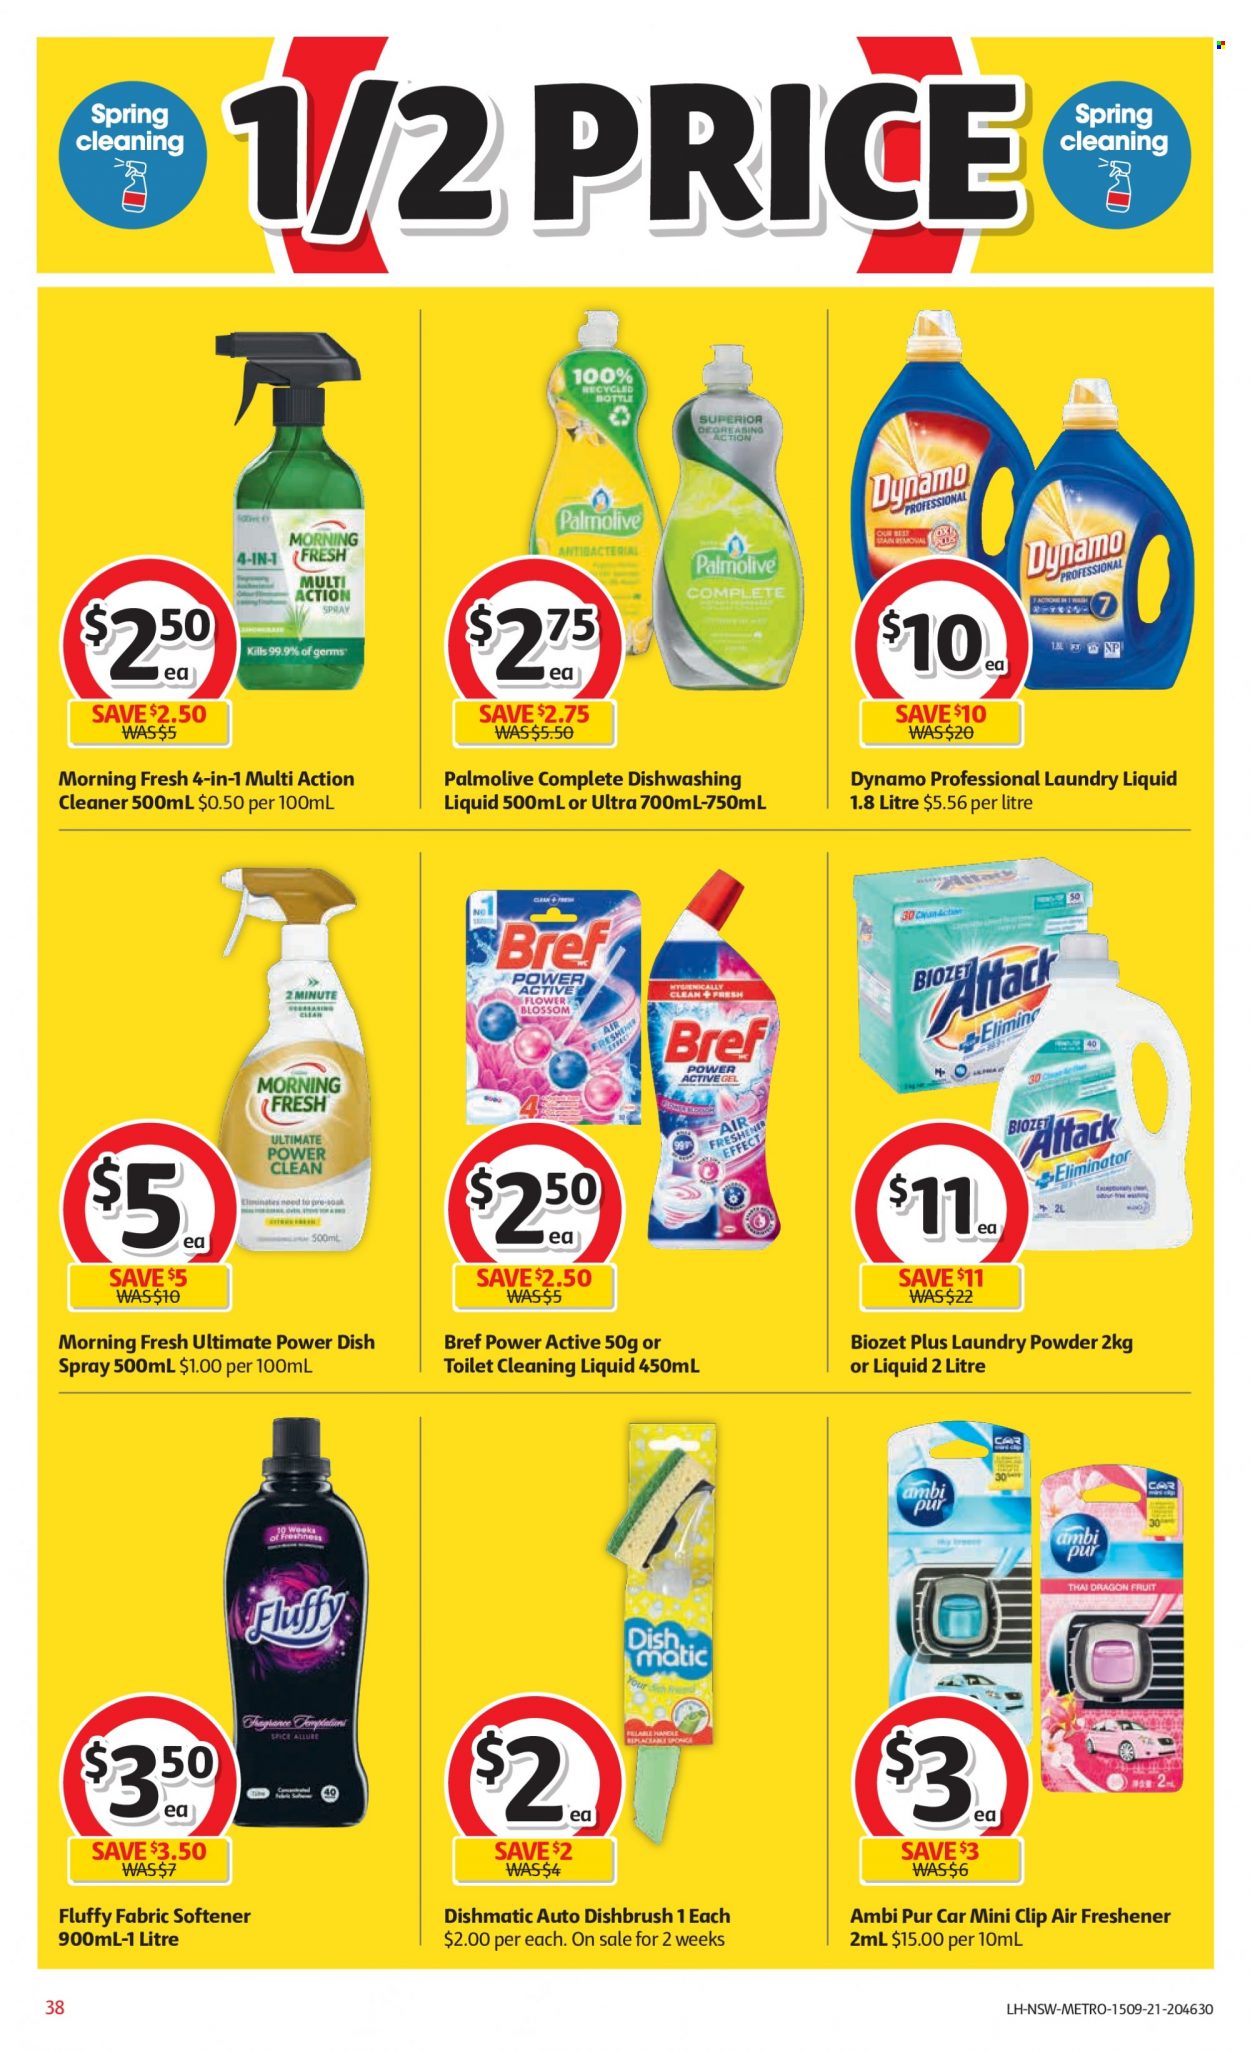 thumbnail - Coles Catalogue - 15 Sep 2021 - 21 Sep 2021 - Sales products - dragon fruit, Blossom, spice, cleaner, toilet cleaning liquid, Bref Power, fabric softener, laundry powder, laundry detergent, dishwashing liquid, Palmolive, sponge, air freshener, Ambi Pur. Page 38.